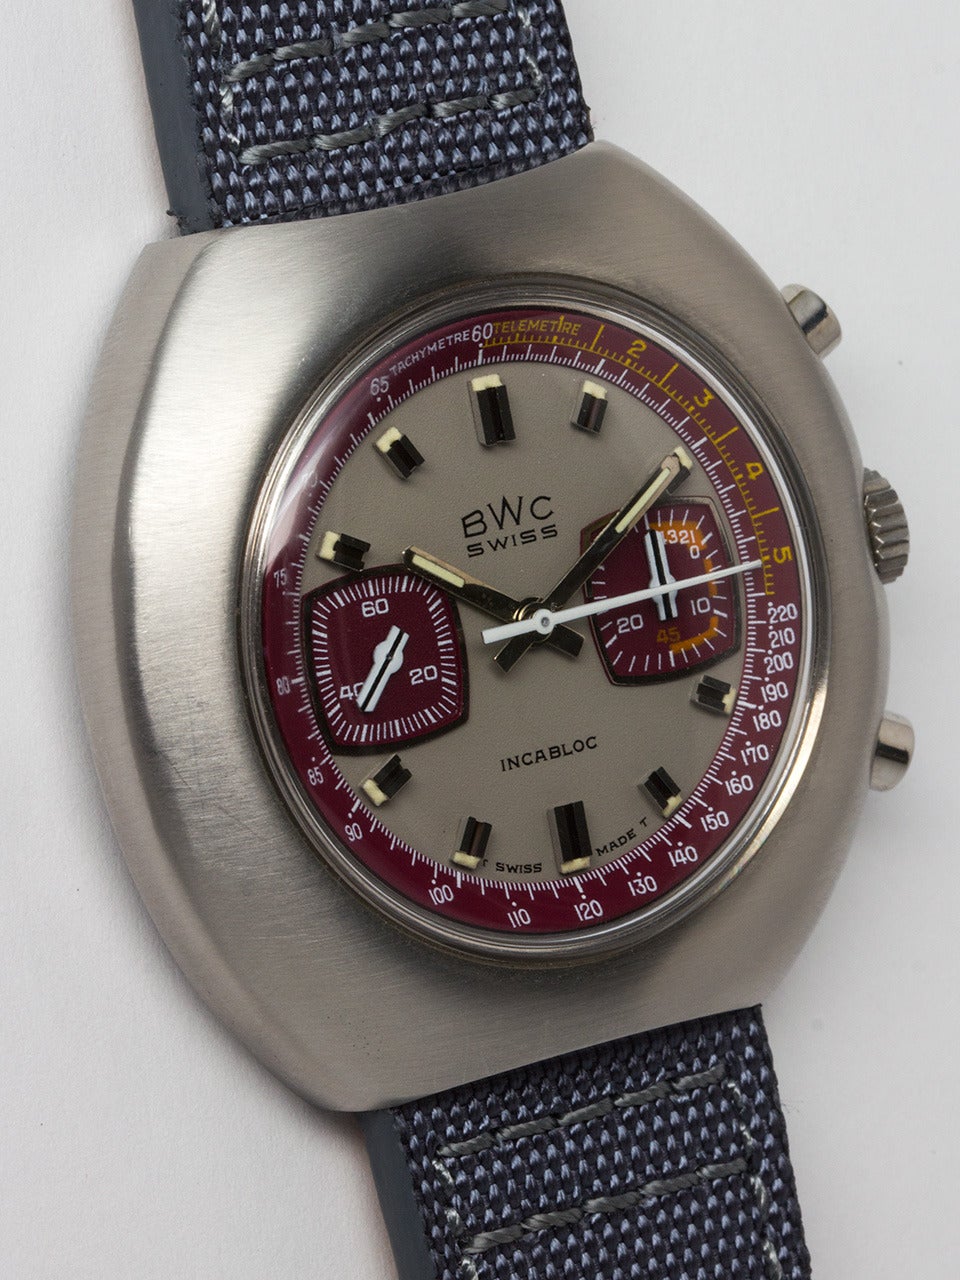 BWC Swiss Chronograph Wristwatch circa 1970s. Massive oversize tonneau shaped chronograph. Very striking gray and burgundy detail dial with prominent silver indexes and large match stick hands, Incabloc printed on dial. 17 jewel manual wind 2